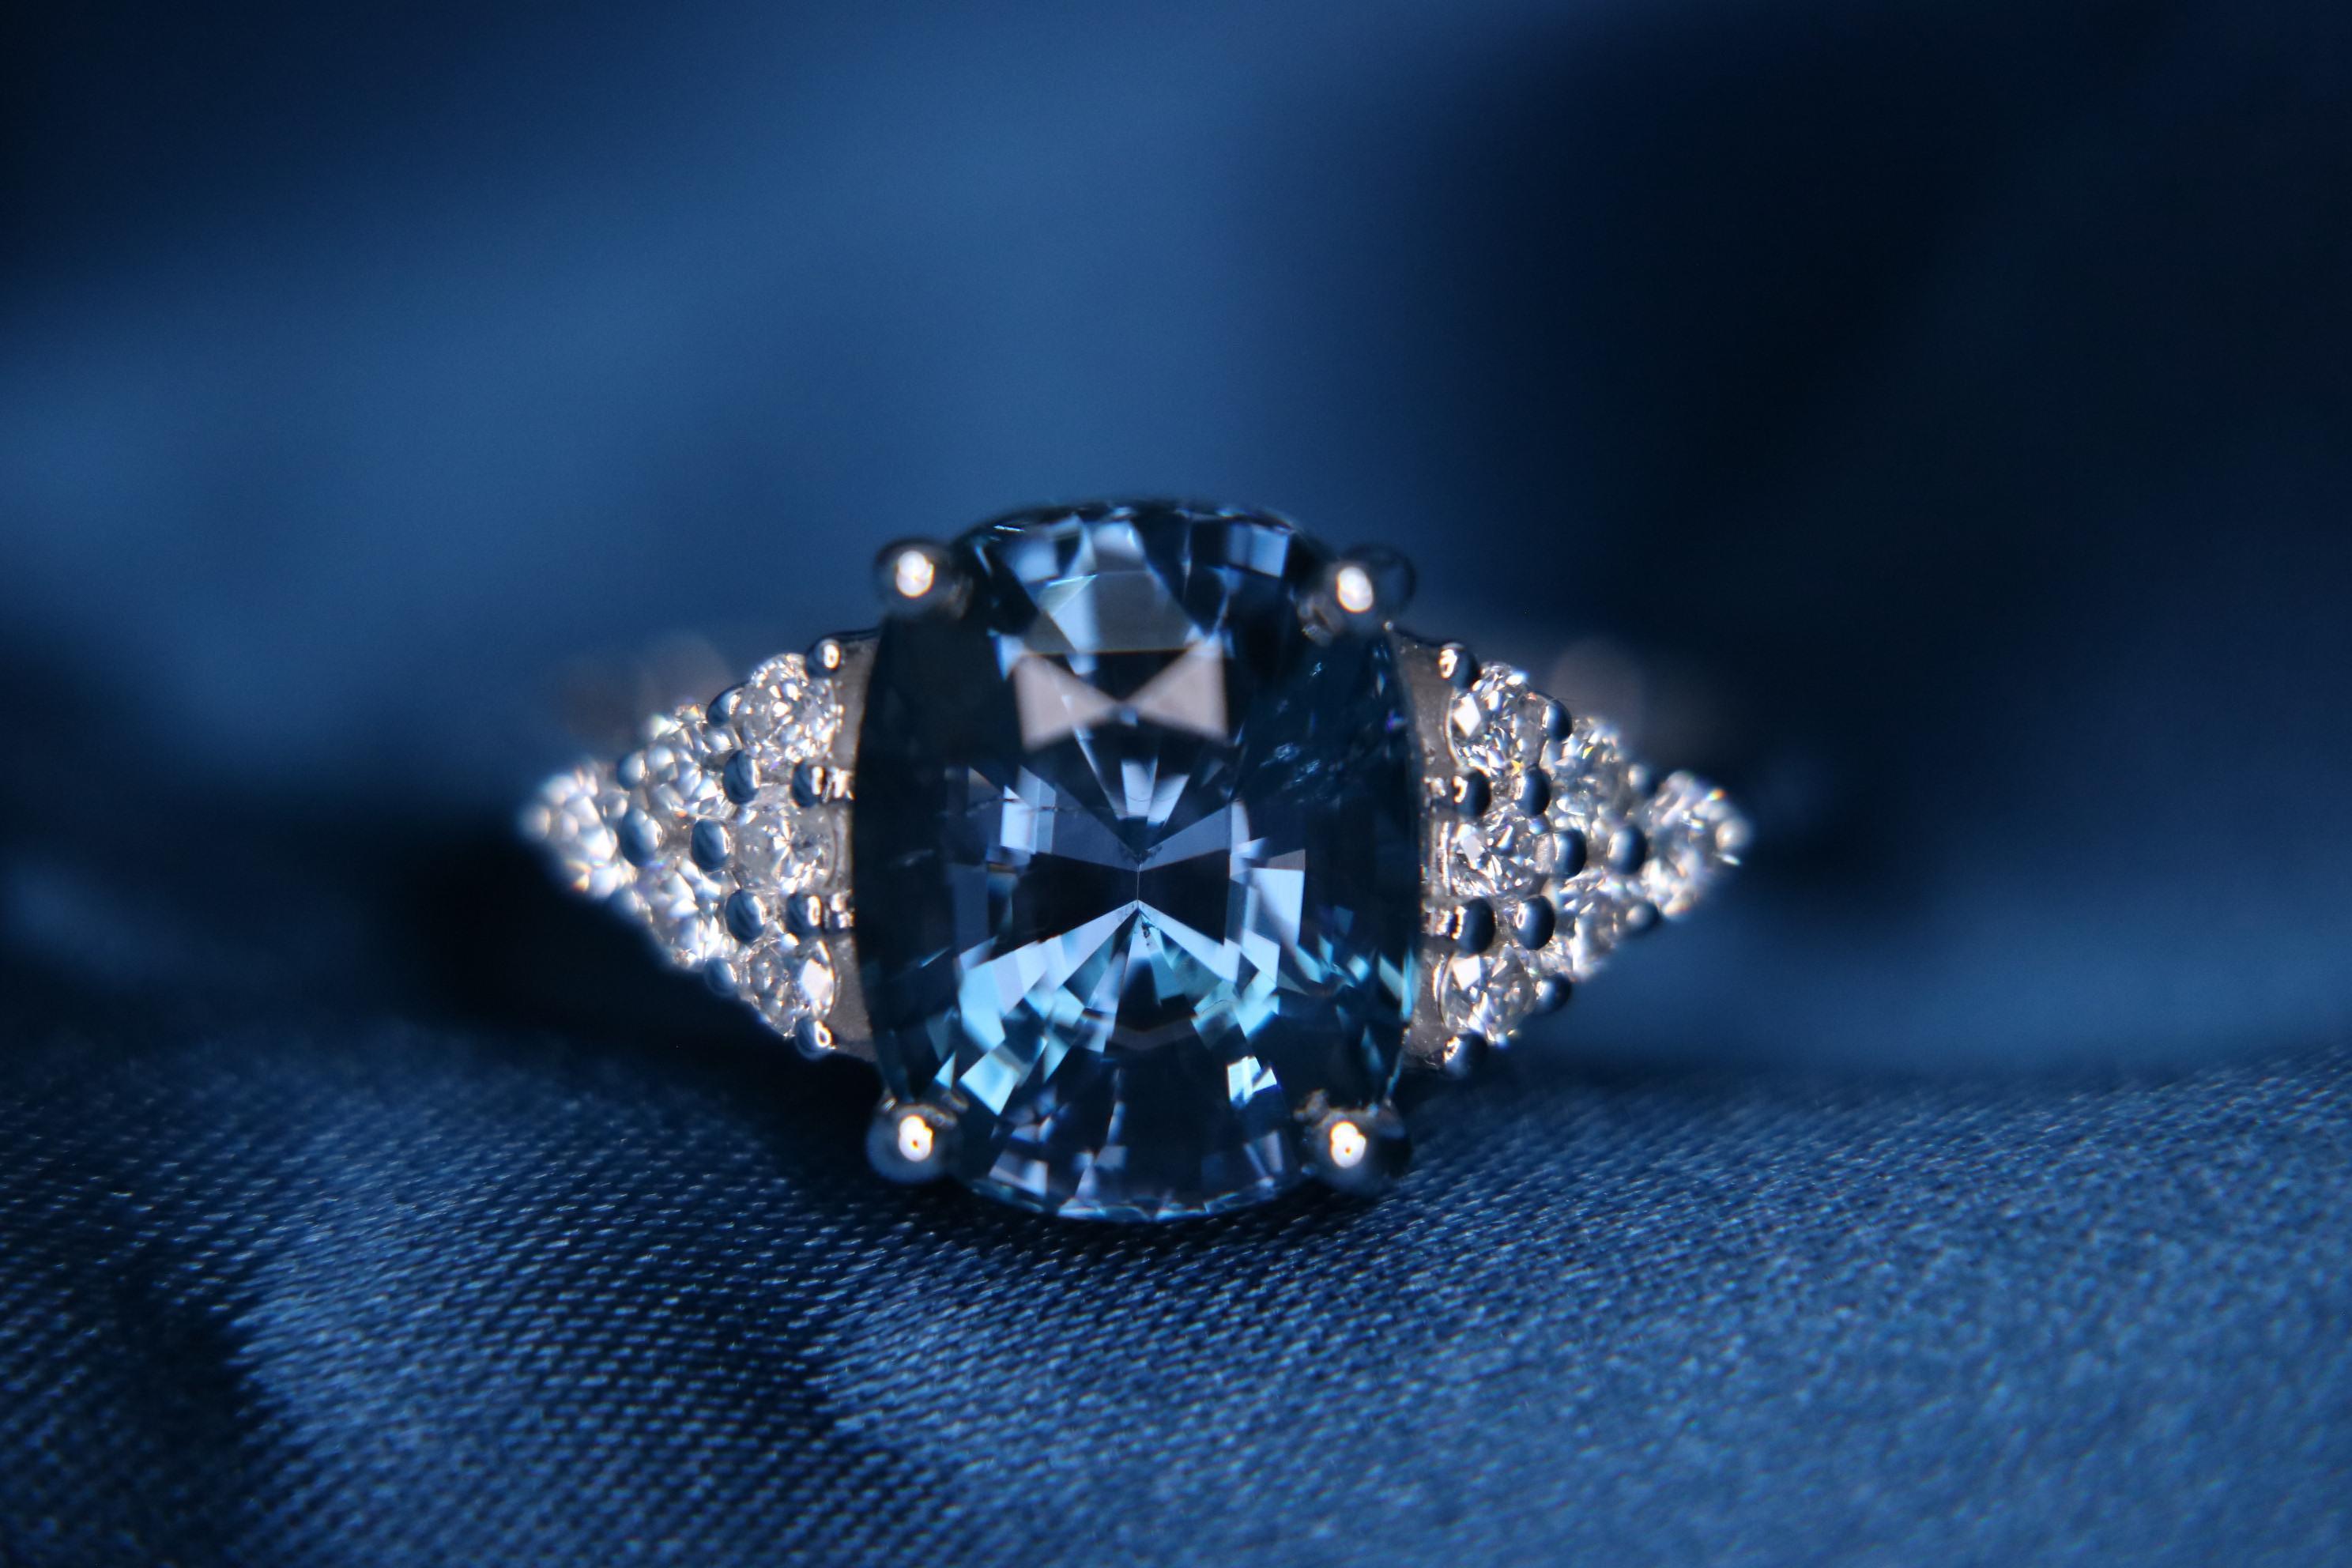 Orloff of Denmark's own; 'Nova'
Extraordinary 4.80 carat African color-change blue spinel ring fashioned out of 18 Karat white gold and set with 12 SI1, F-colored diamonds.
Hailing from Madagascar, this majestic blue spinel, reminiscent of the